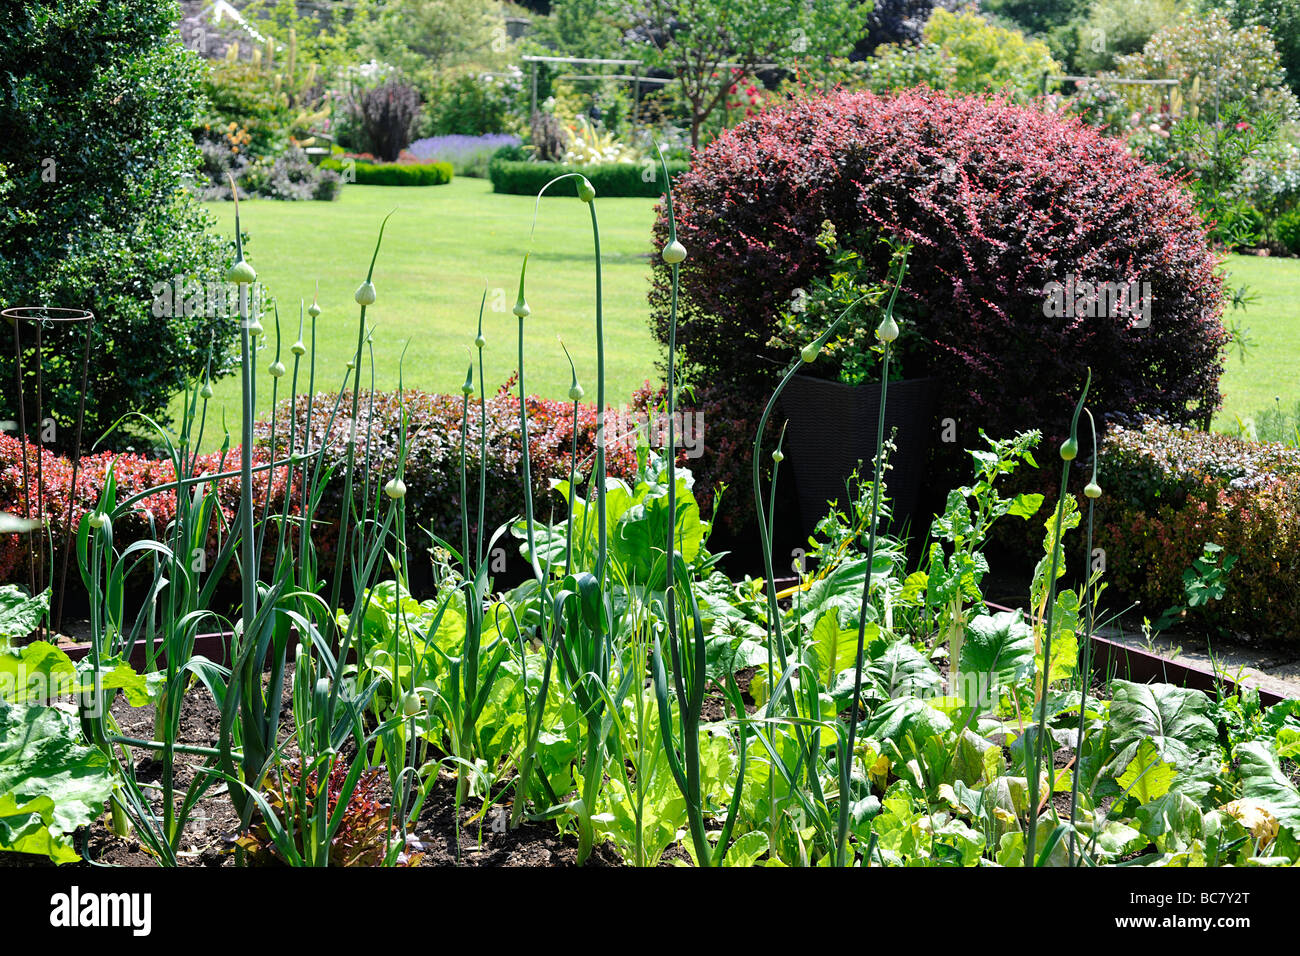 Vegetable garden plots in a landscaped English Garden in Stoberry Park, Somerset, UK Stock Photo